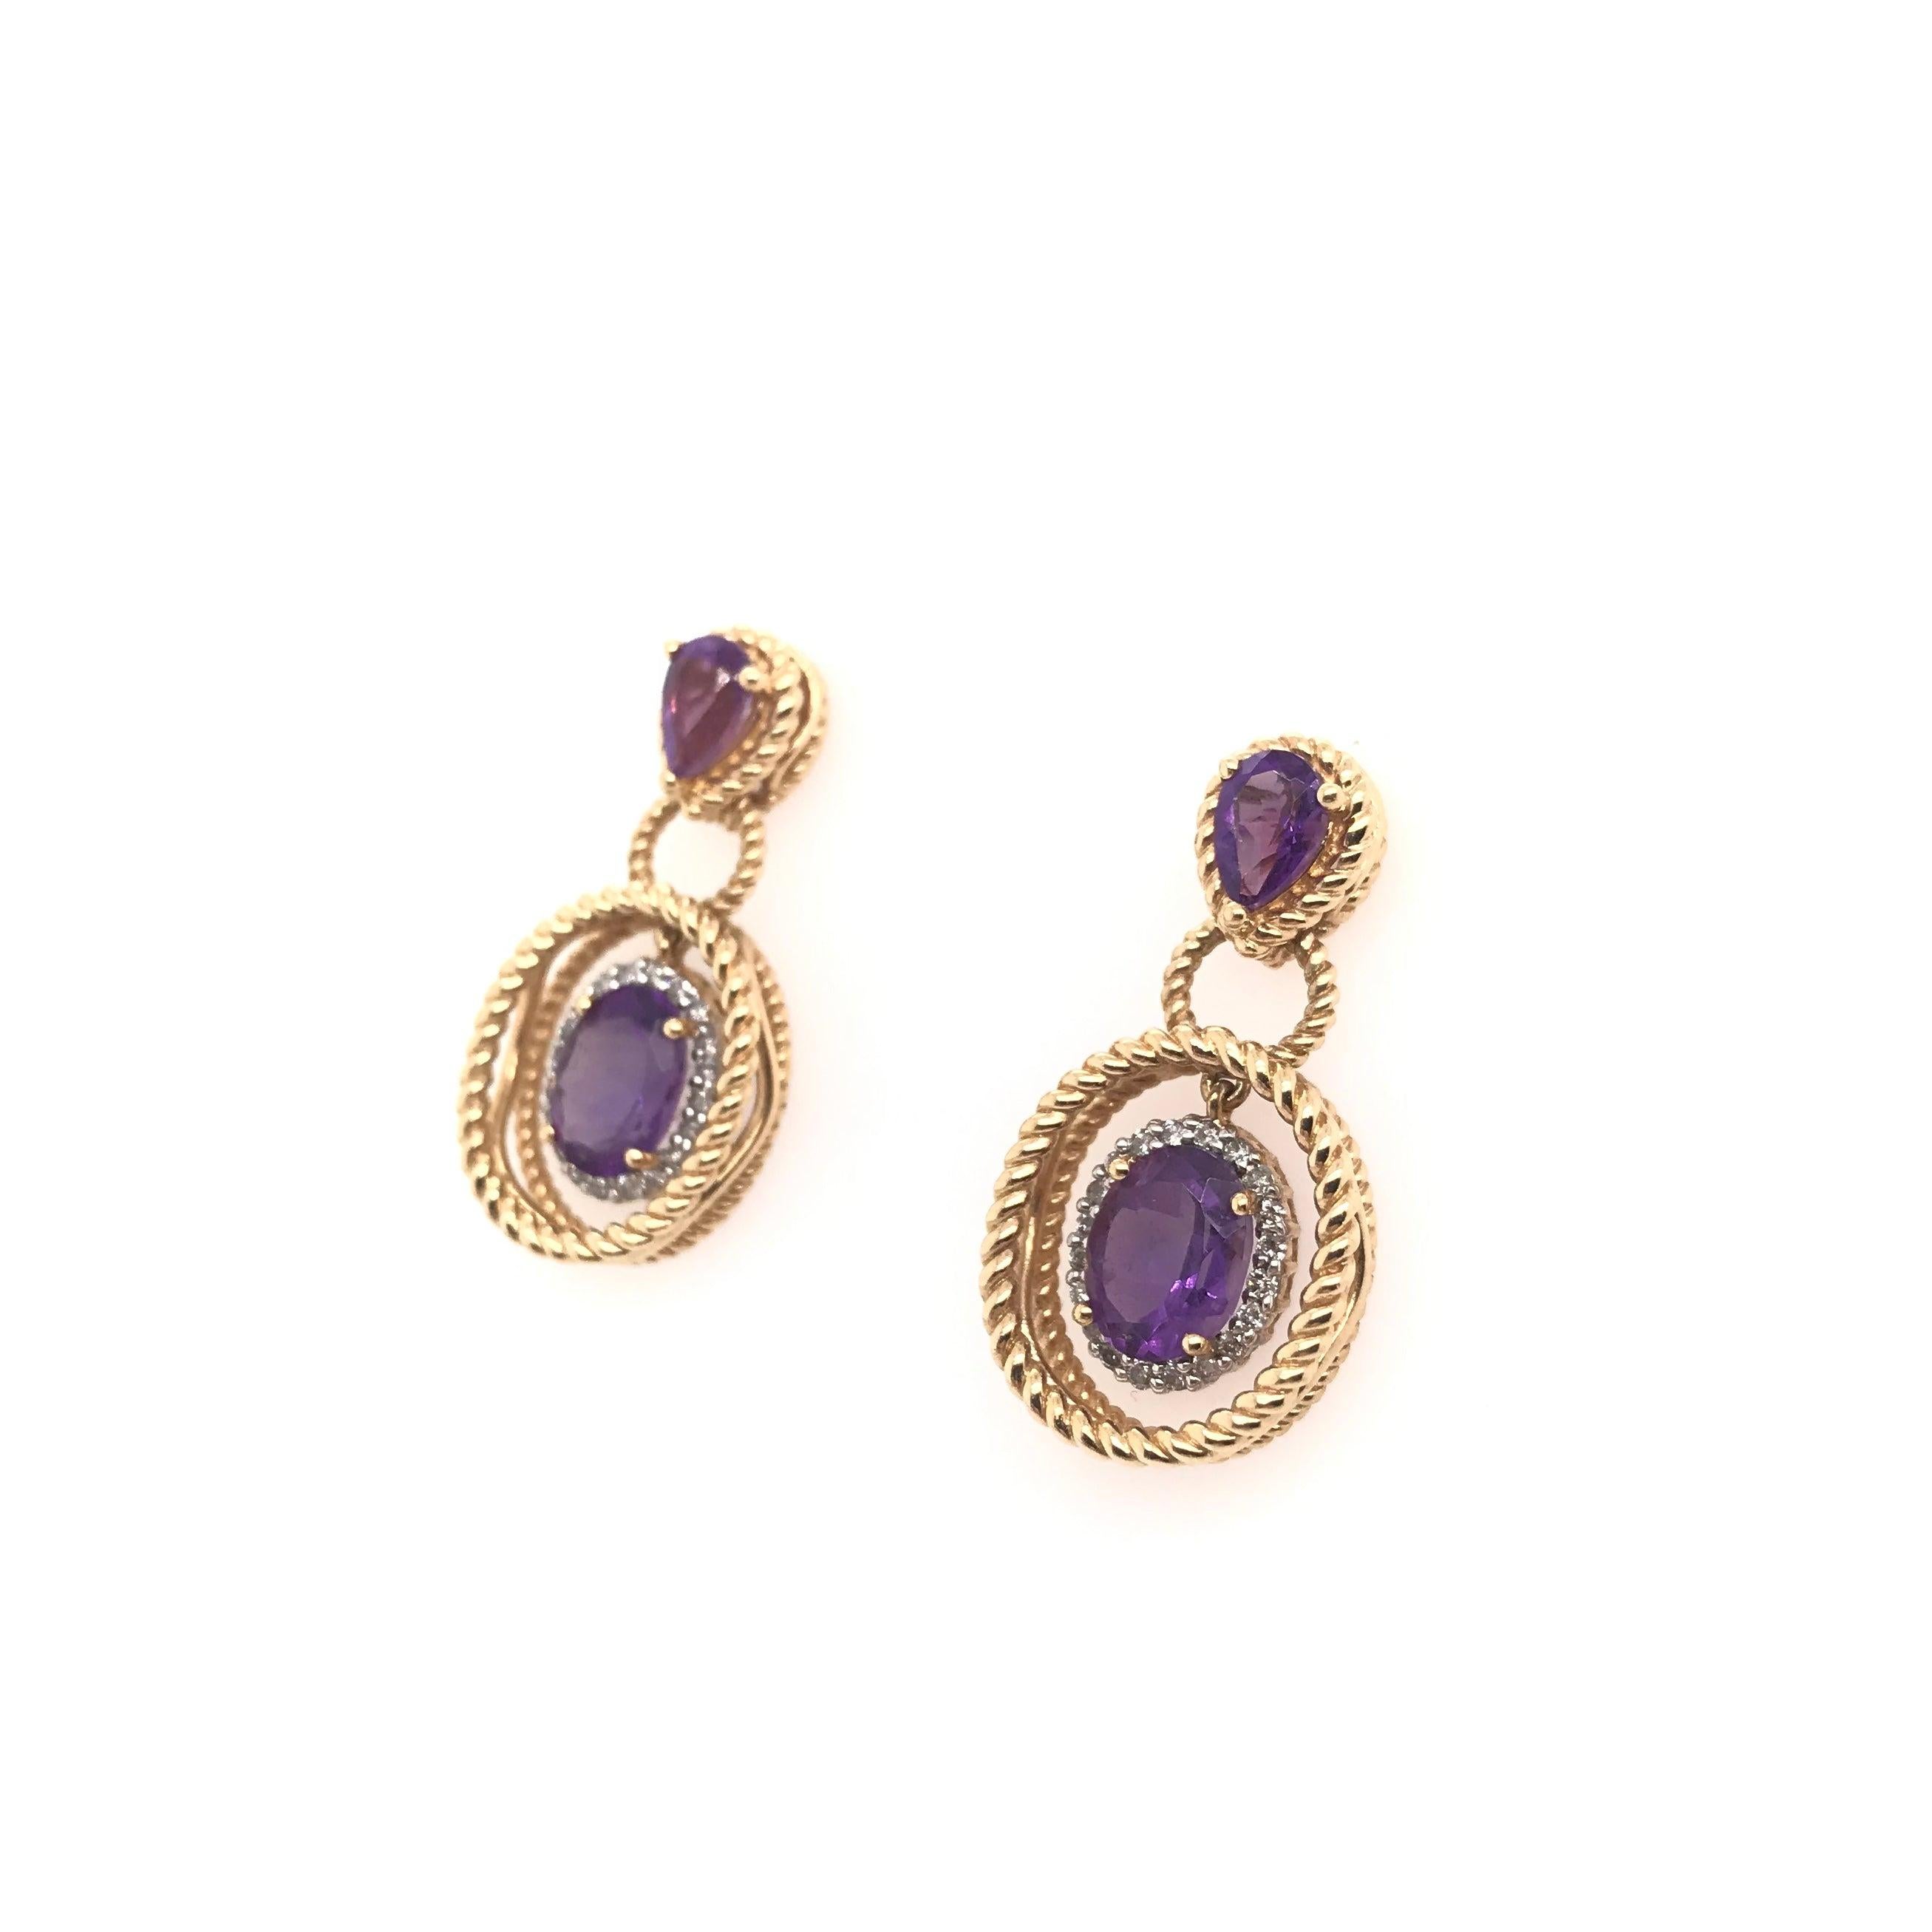 These amethyst and diamond drop style earrings are a contemporary piece. Each earring features one fancy pear cut amethyst along with an oval cut amethyst. Each oval cut is haloed beautifully by tiny sparkling diamonds. The 14k gold settings feature